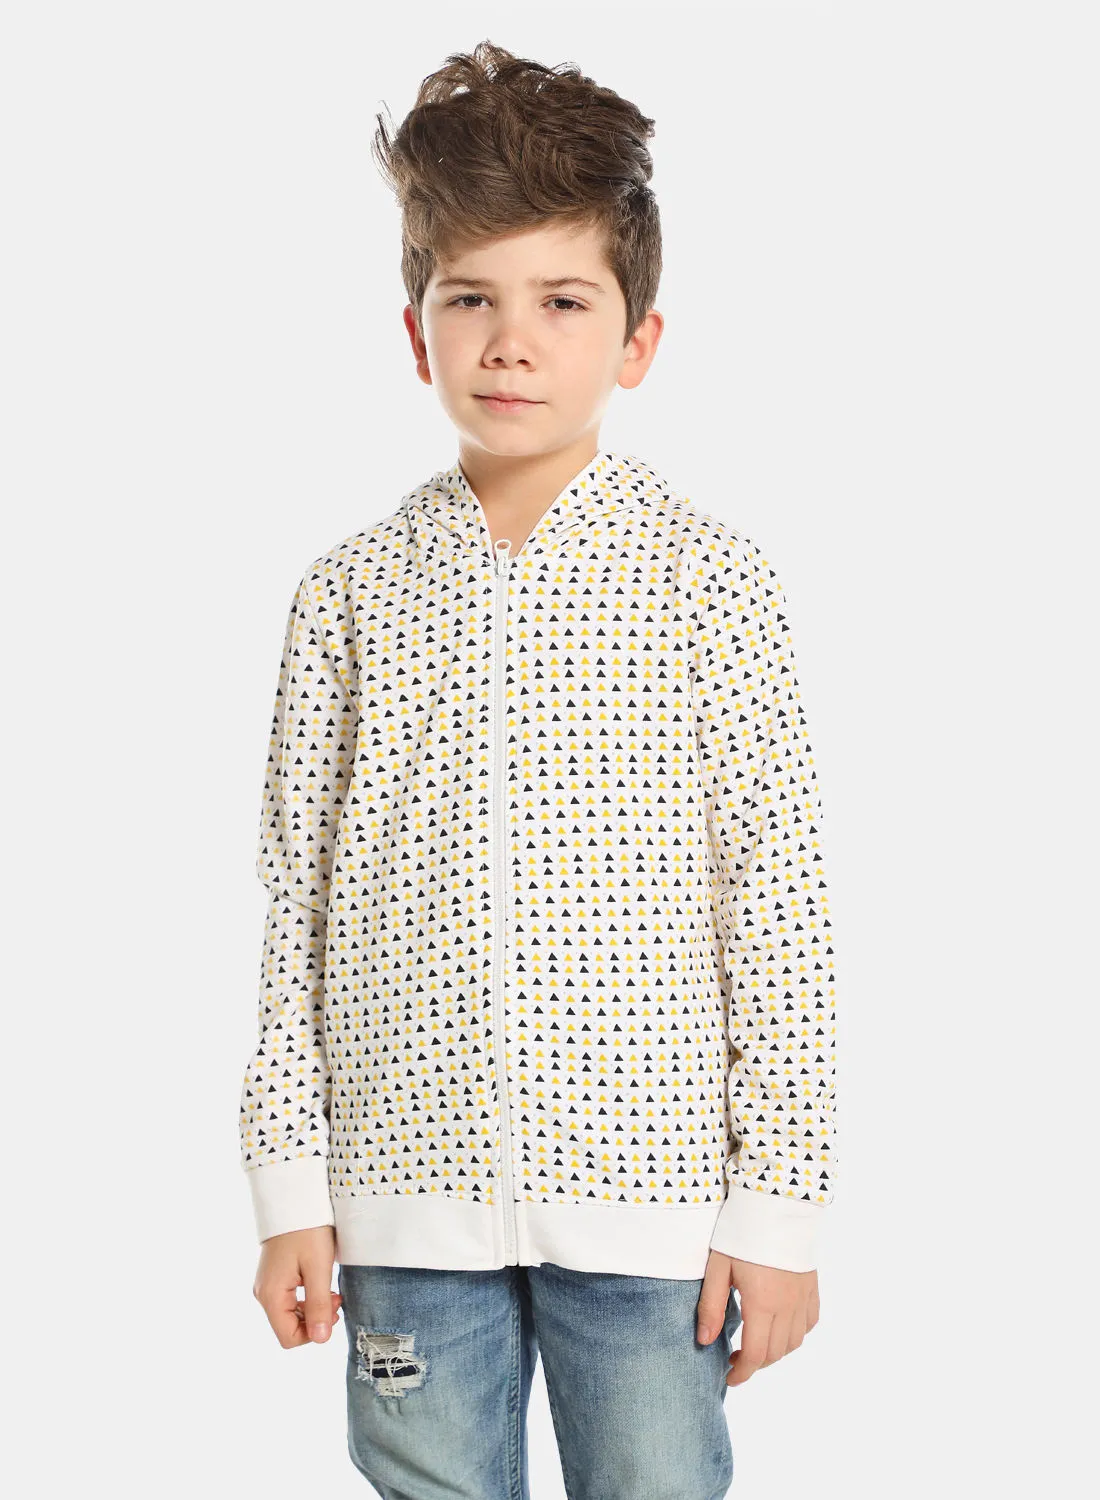 QUWA Boys Comfortable All Over Printed Long Sleeve Cotton Casual Sweatshirt White/Blue/Yellow